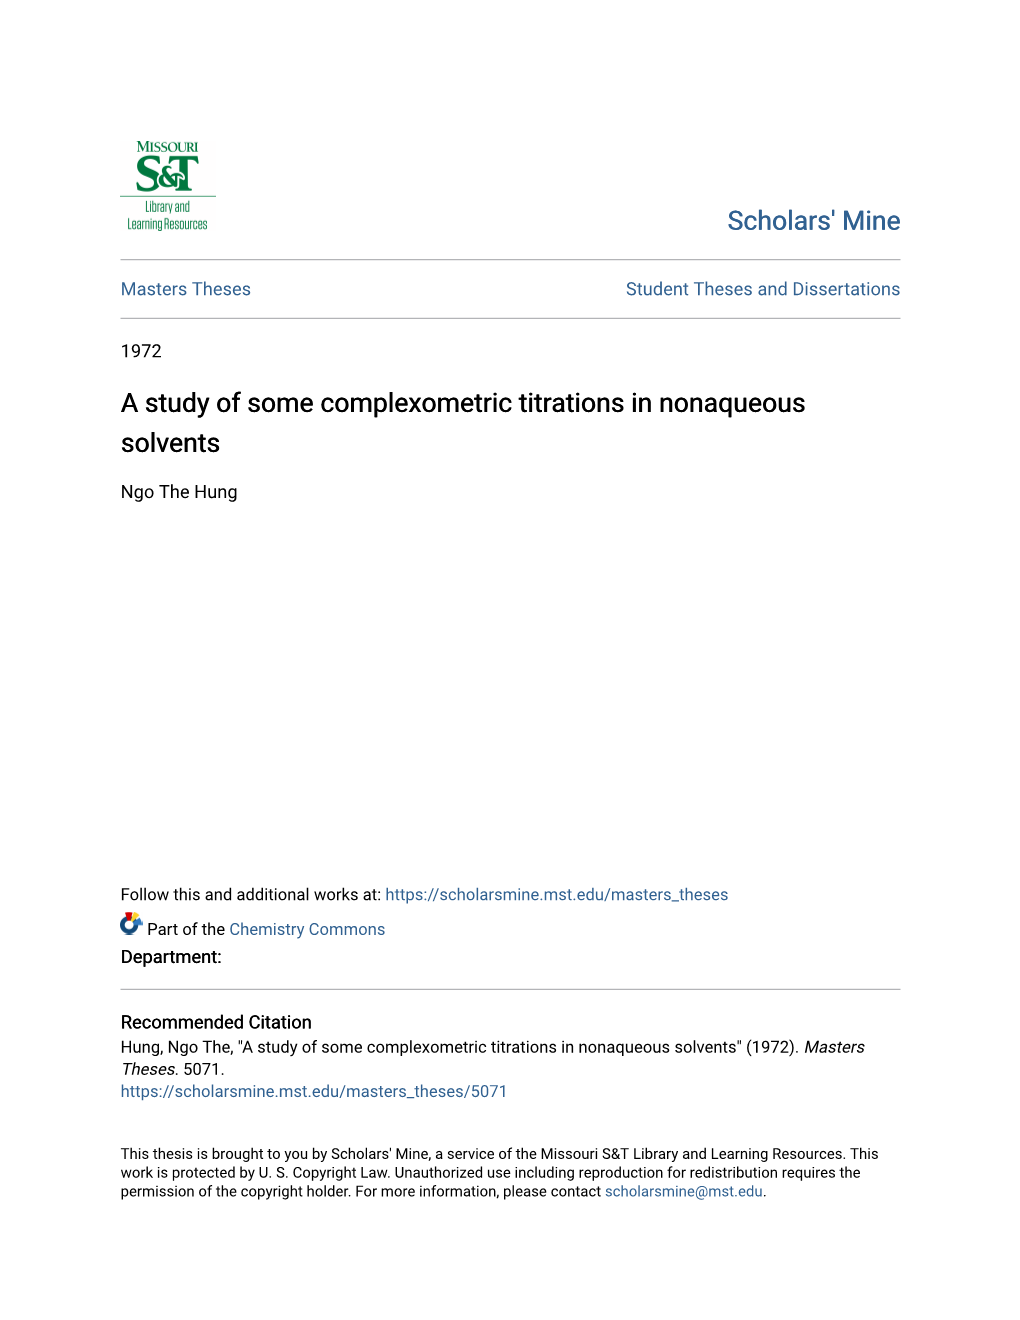 A Study of Some Complexometric Titrations in Nonaqueous Solvents